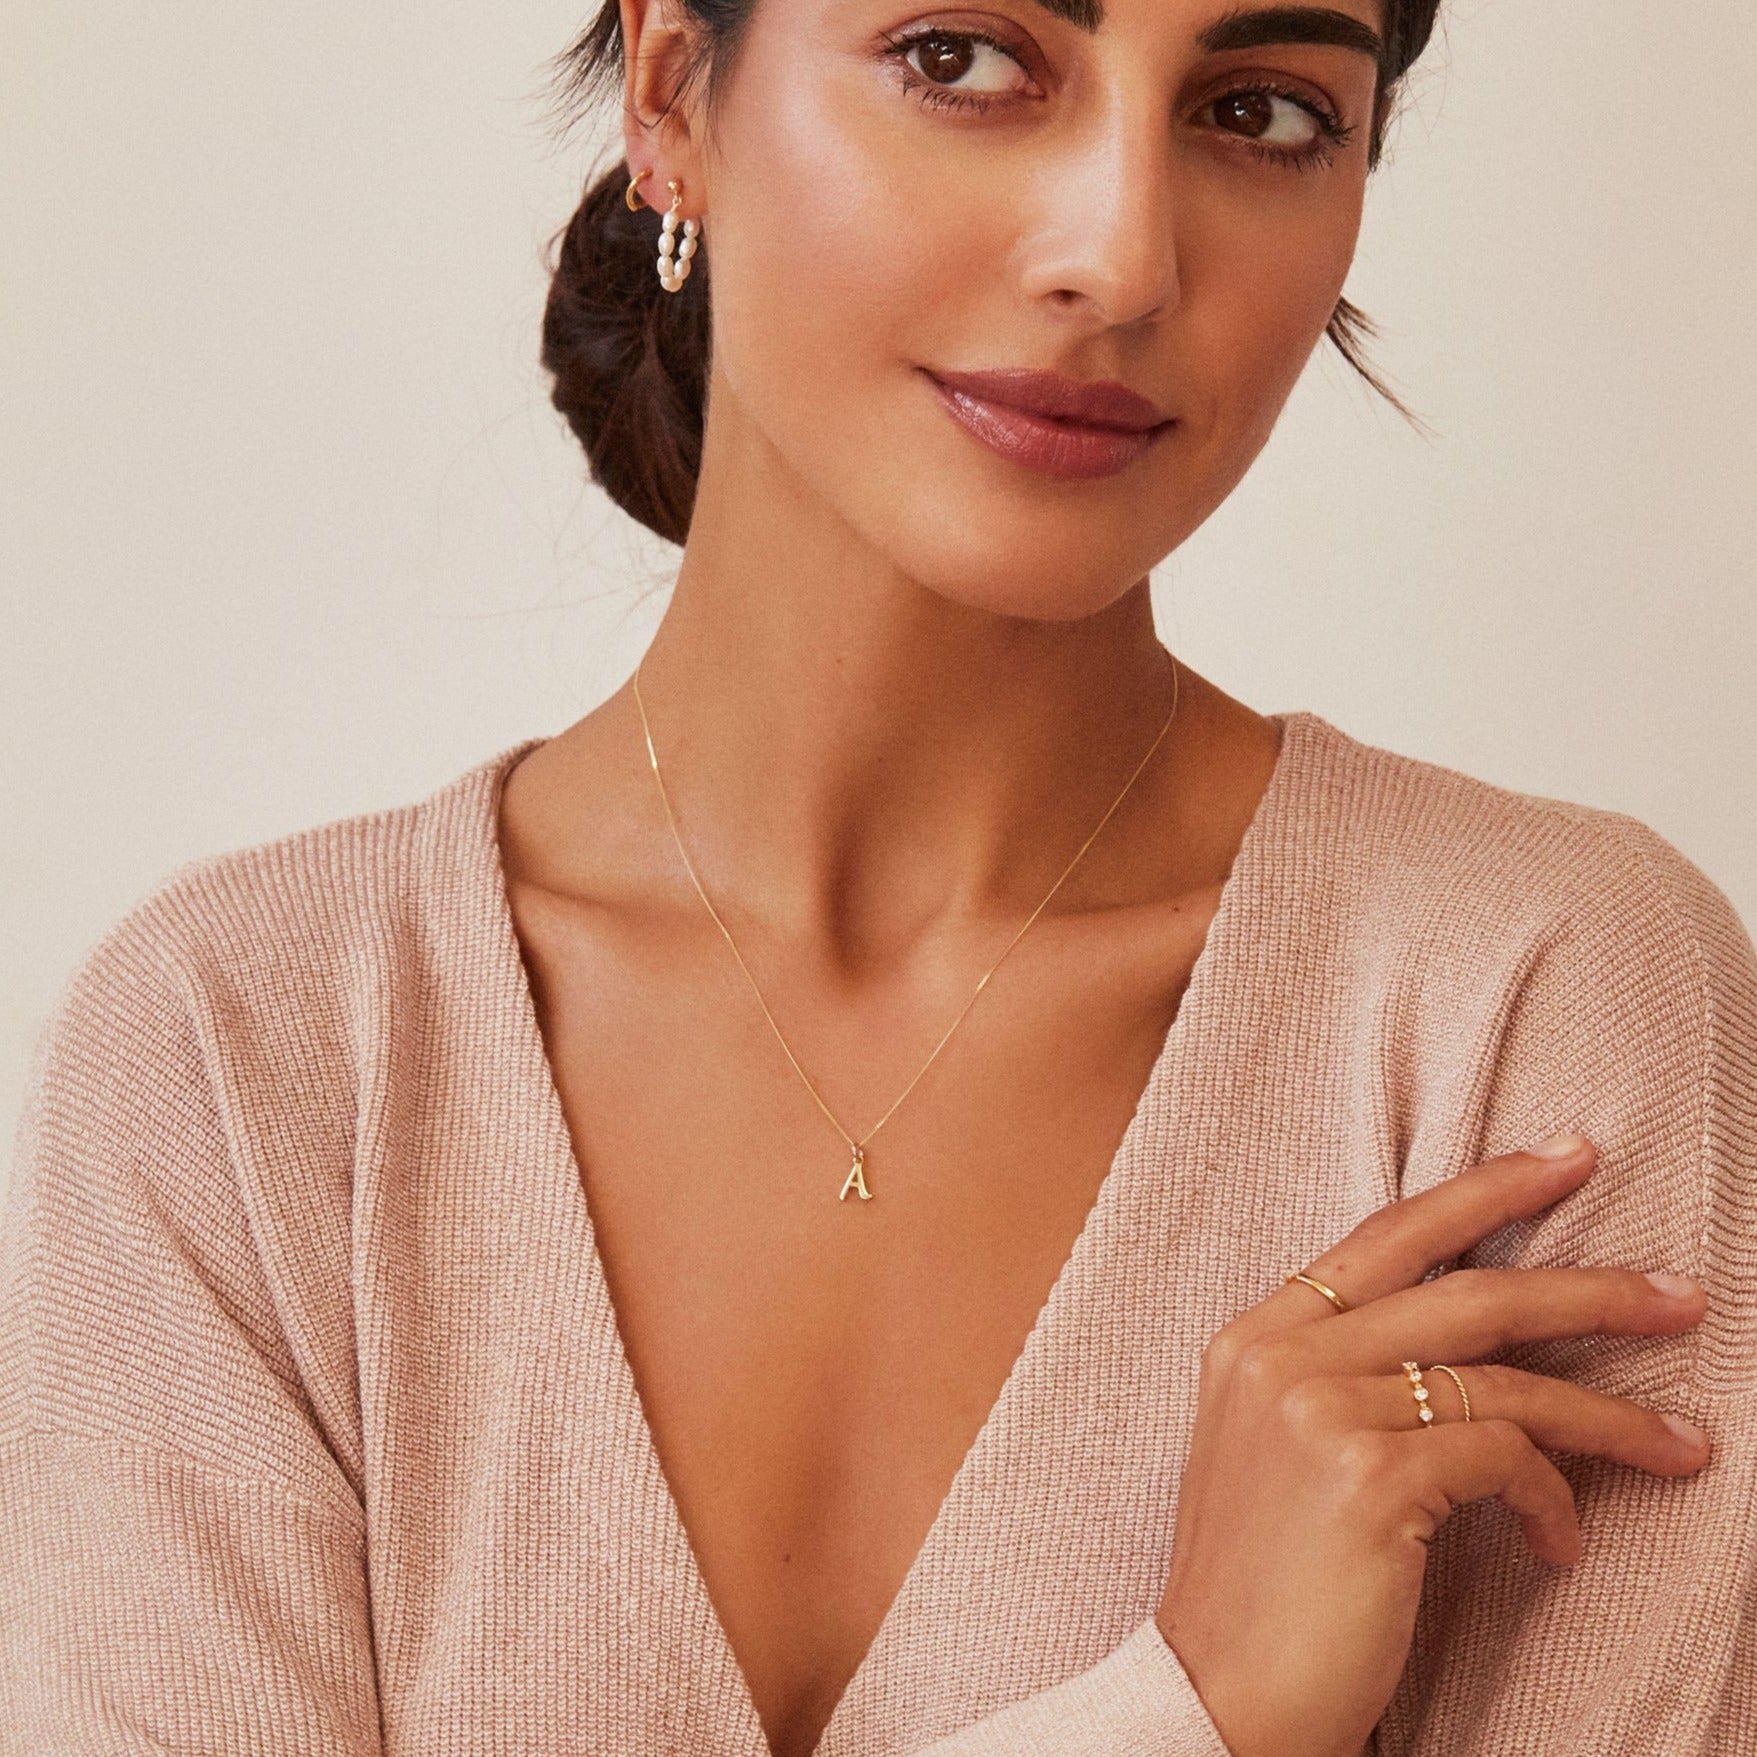 Gold seed pearl hoop earring in ear lobe of a dark haired woman looking to the side with a silver individual curve initial charm 'A' around her neck